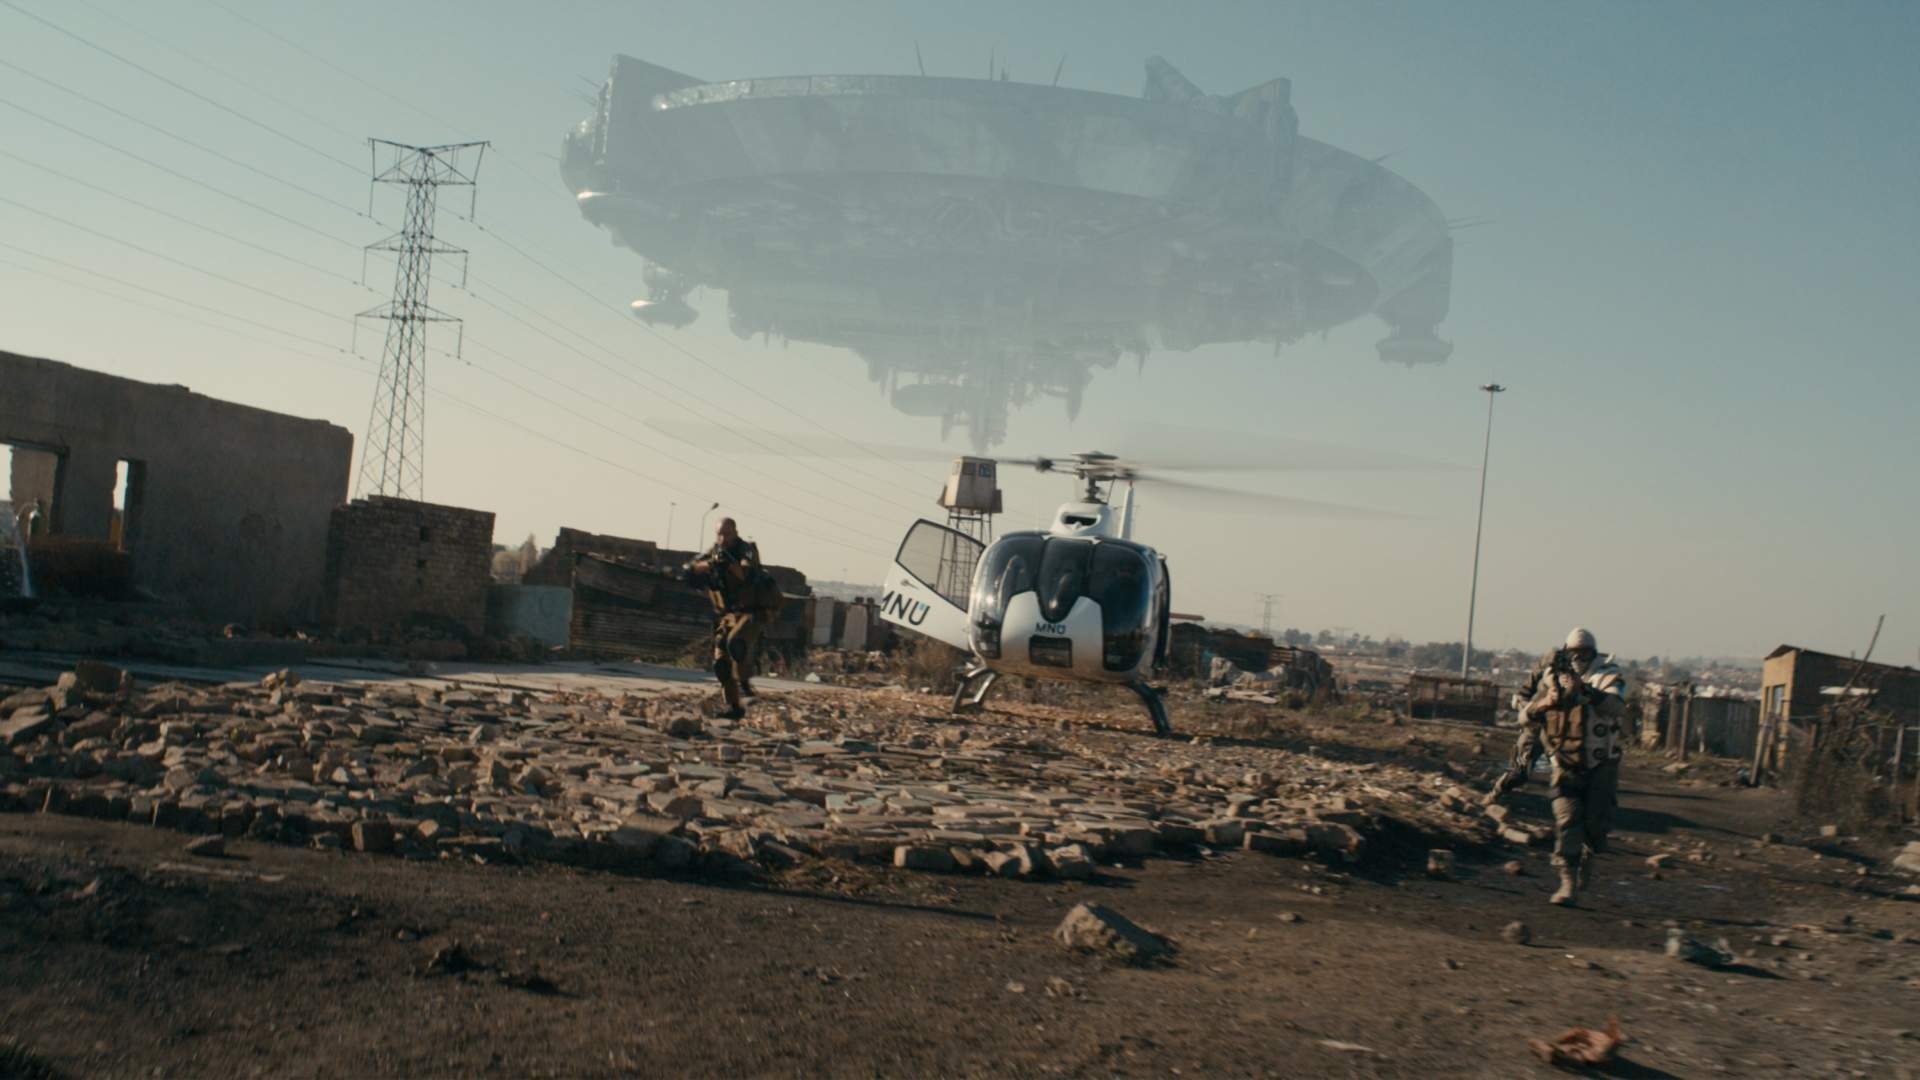 District 9: Named one of the top 10 independent films of 2009 by the National Board of Review of Motion Pictures. 1920x1080 Full HD Background.